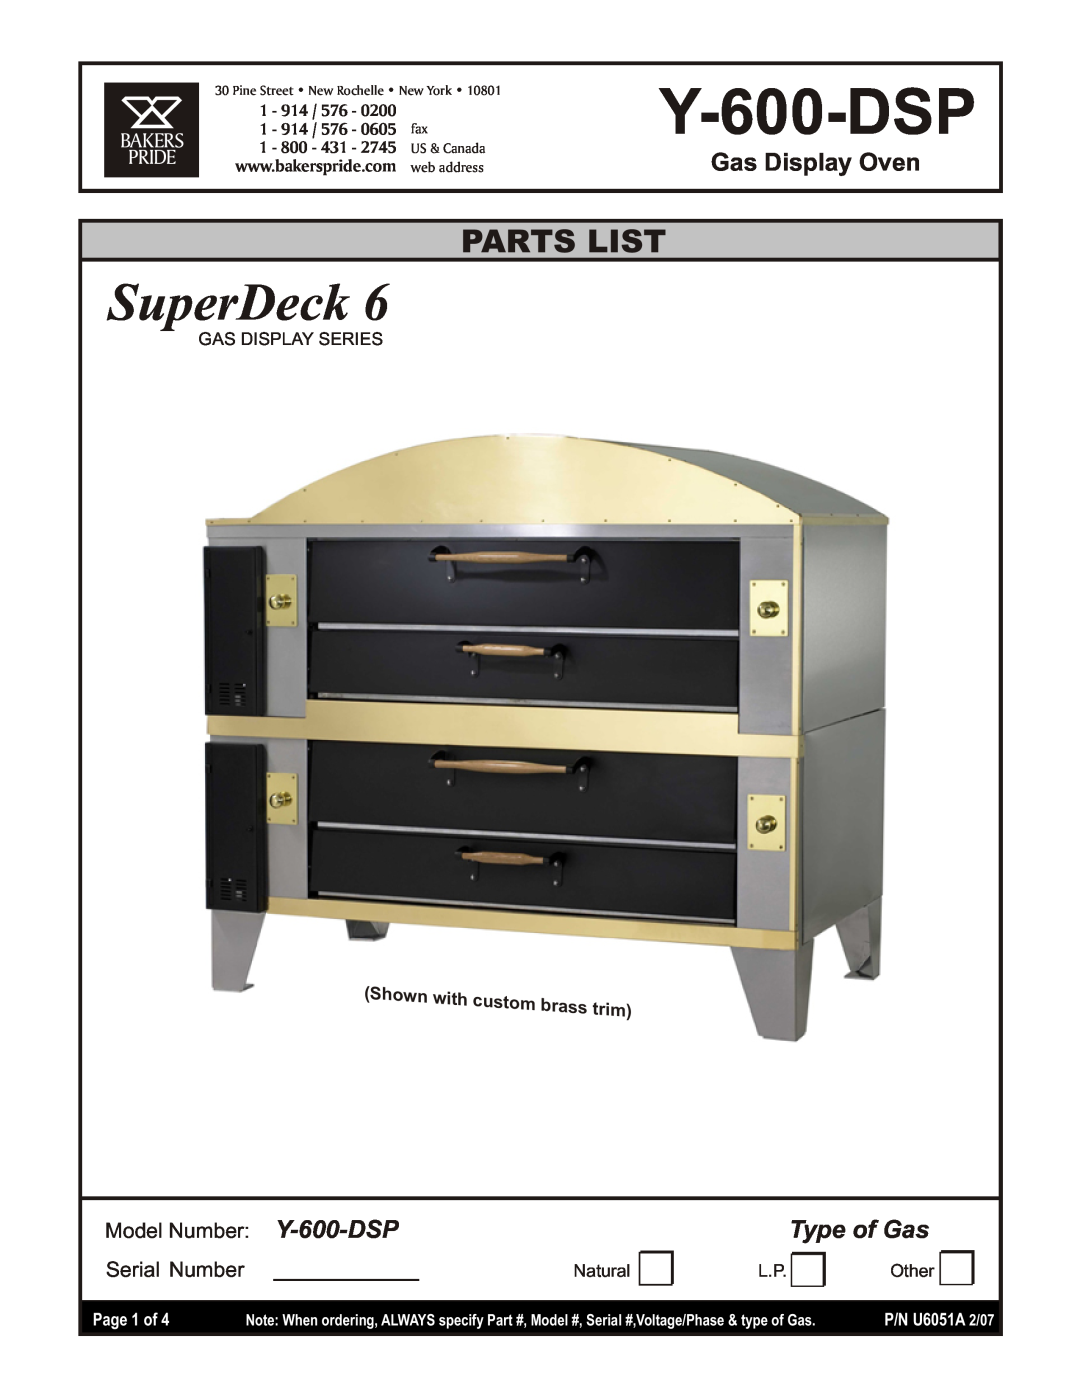 Bakers Pride Oven Y-600-DSP manual Page 1 of, SuperDeck, Parts List, Gas Display Oven, Type of Gas, 1 - 914, 1 - 800 